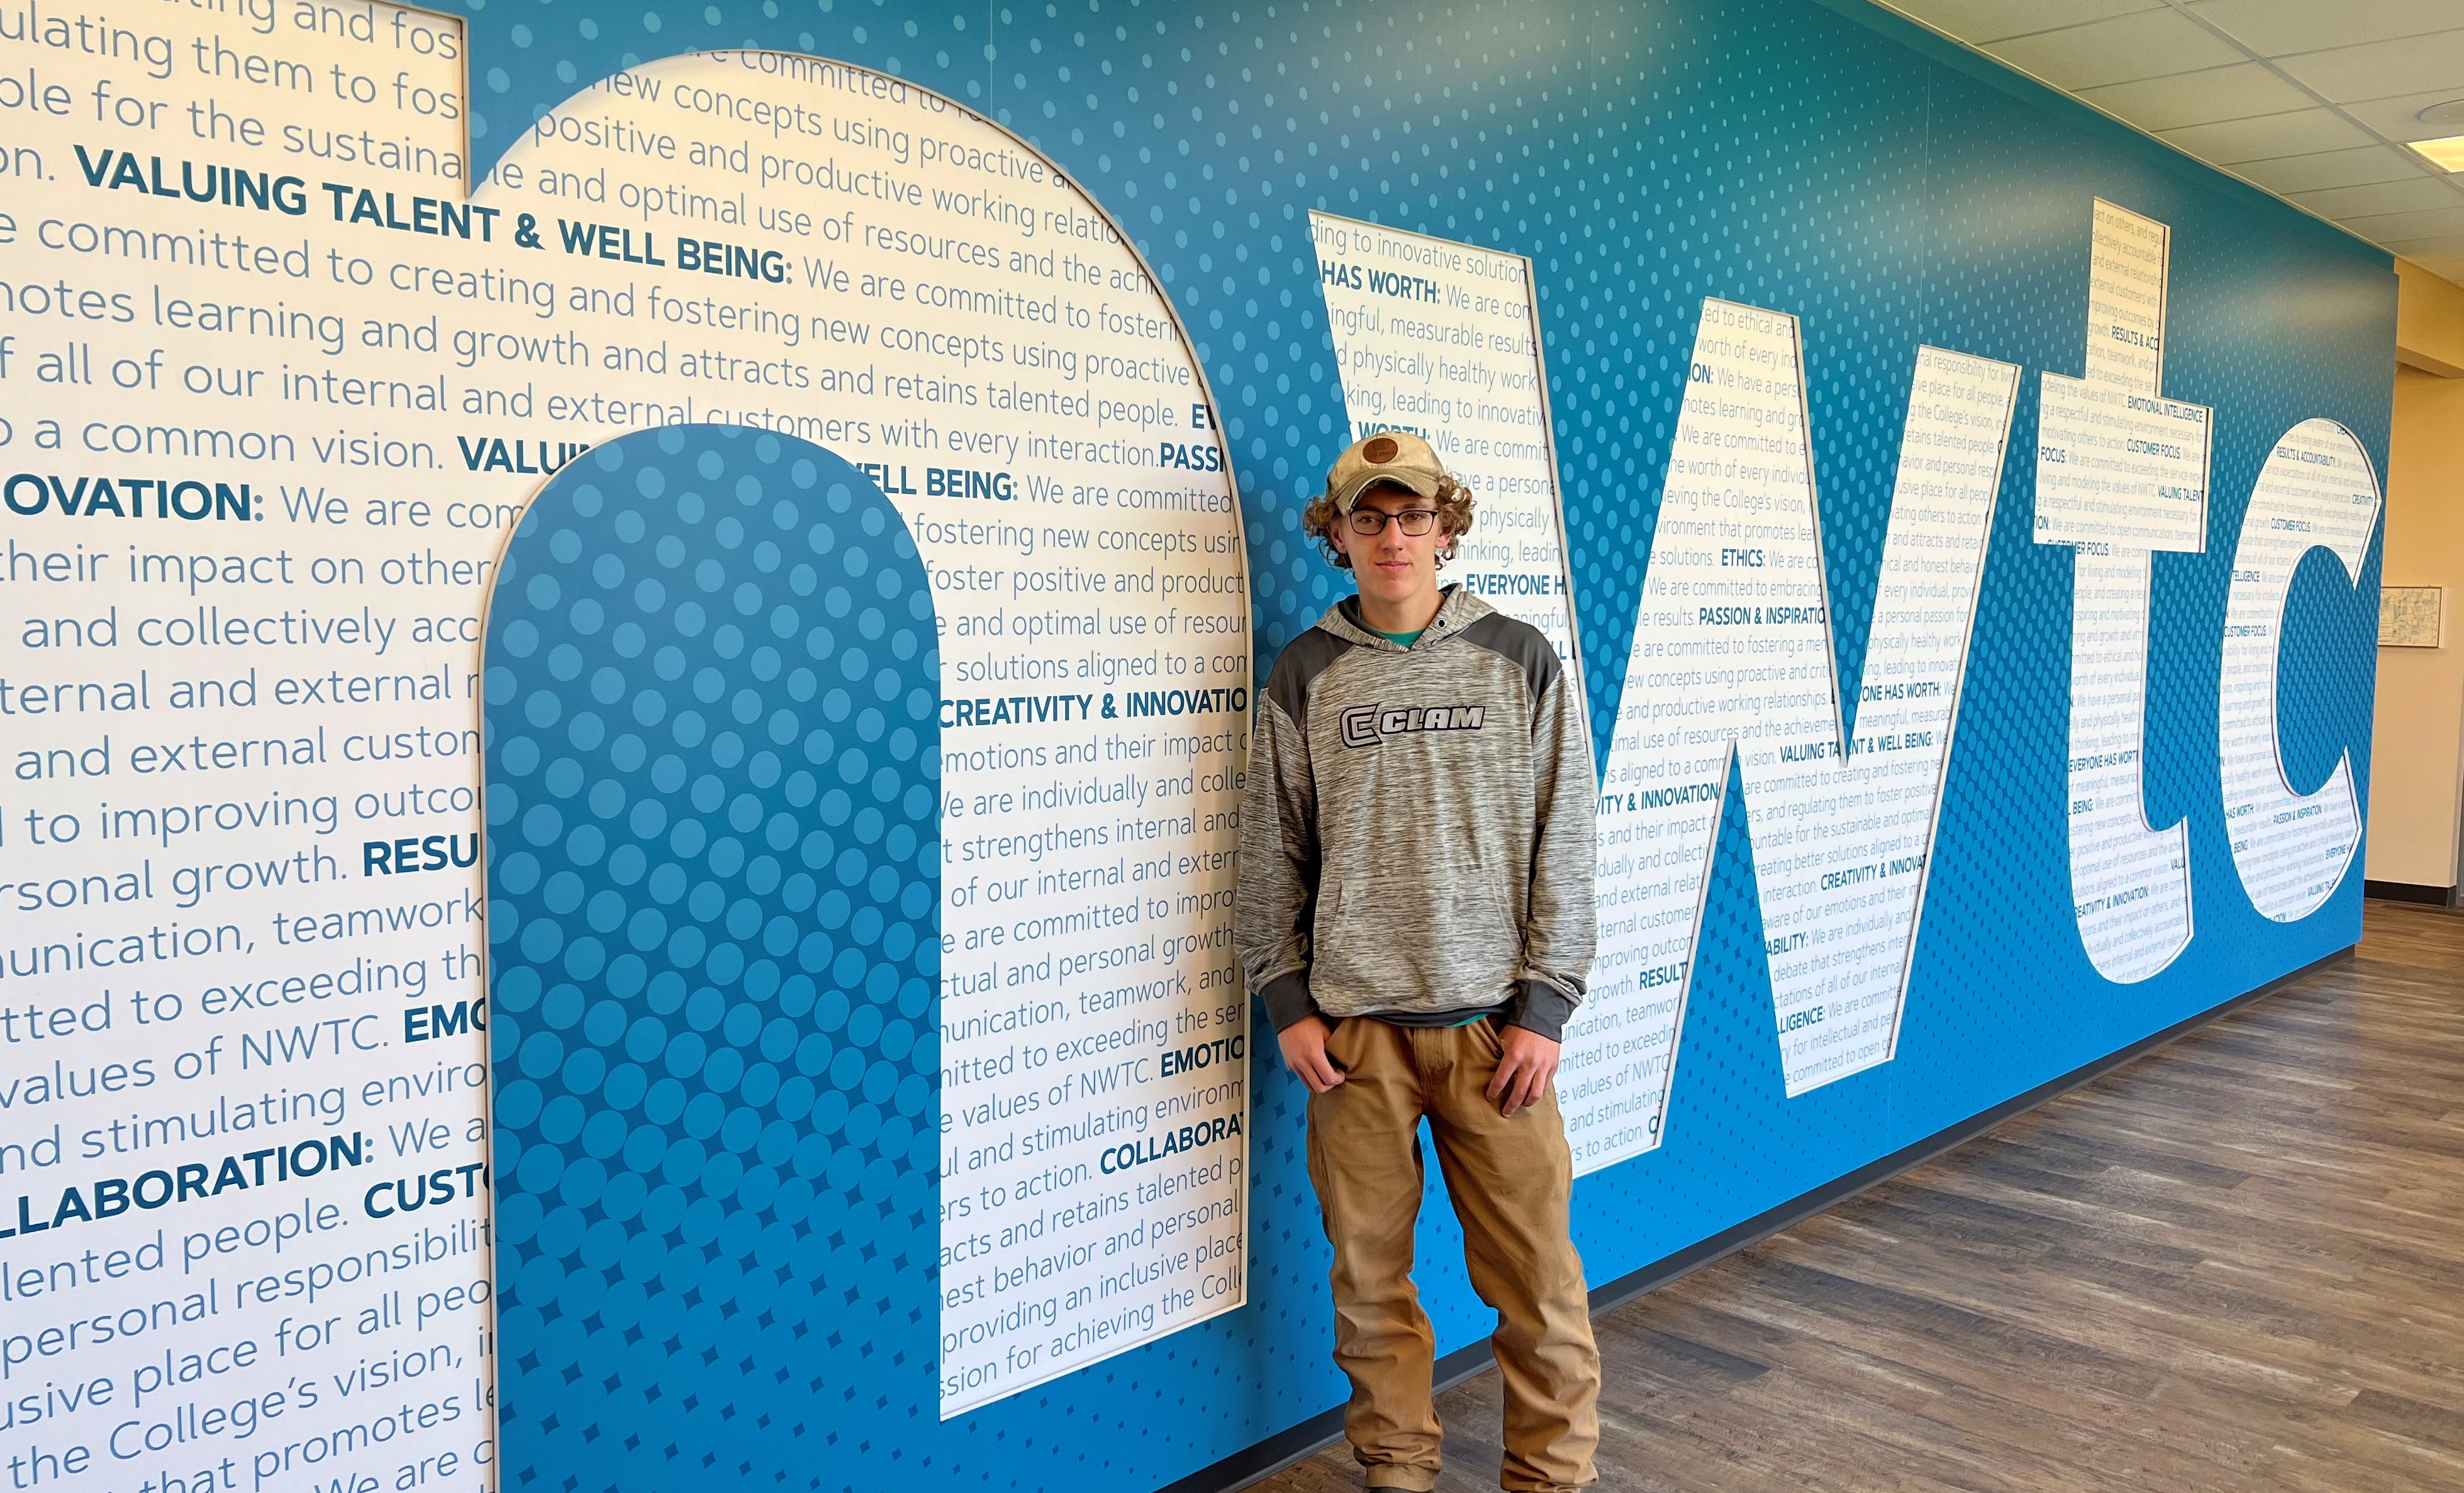 Peyton Betts poses for a picture in front of NWTC sign